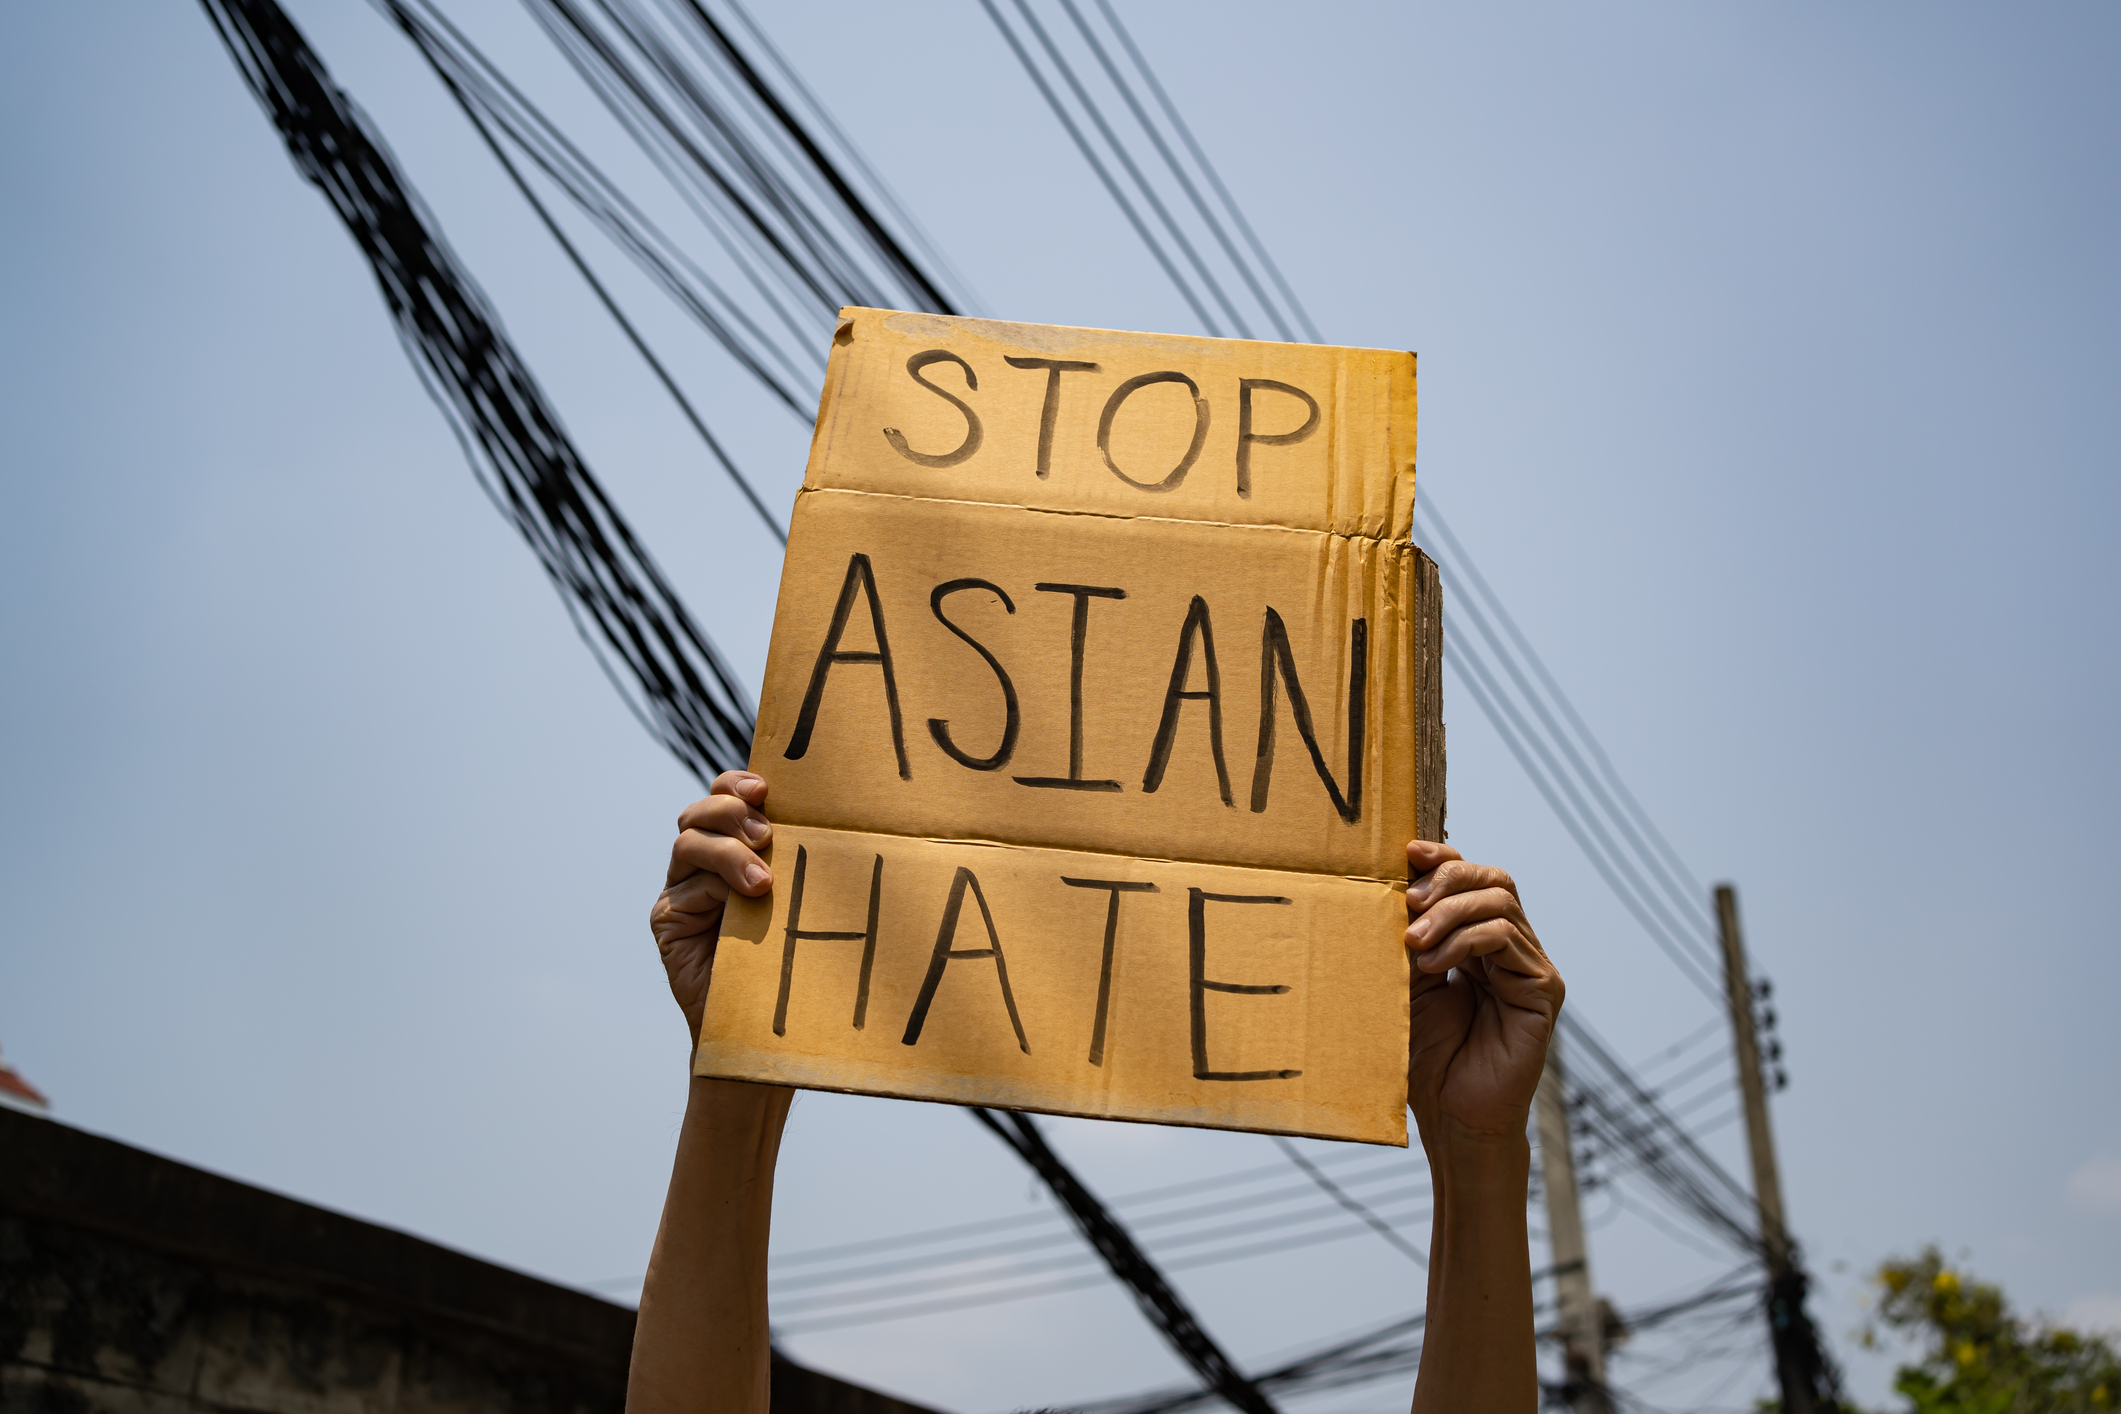 Person holding a "Stop Asian Hate" sign